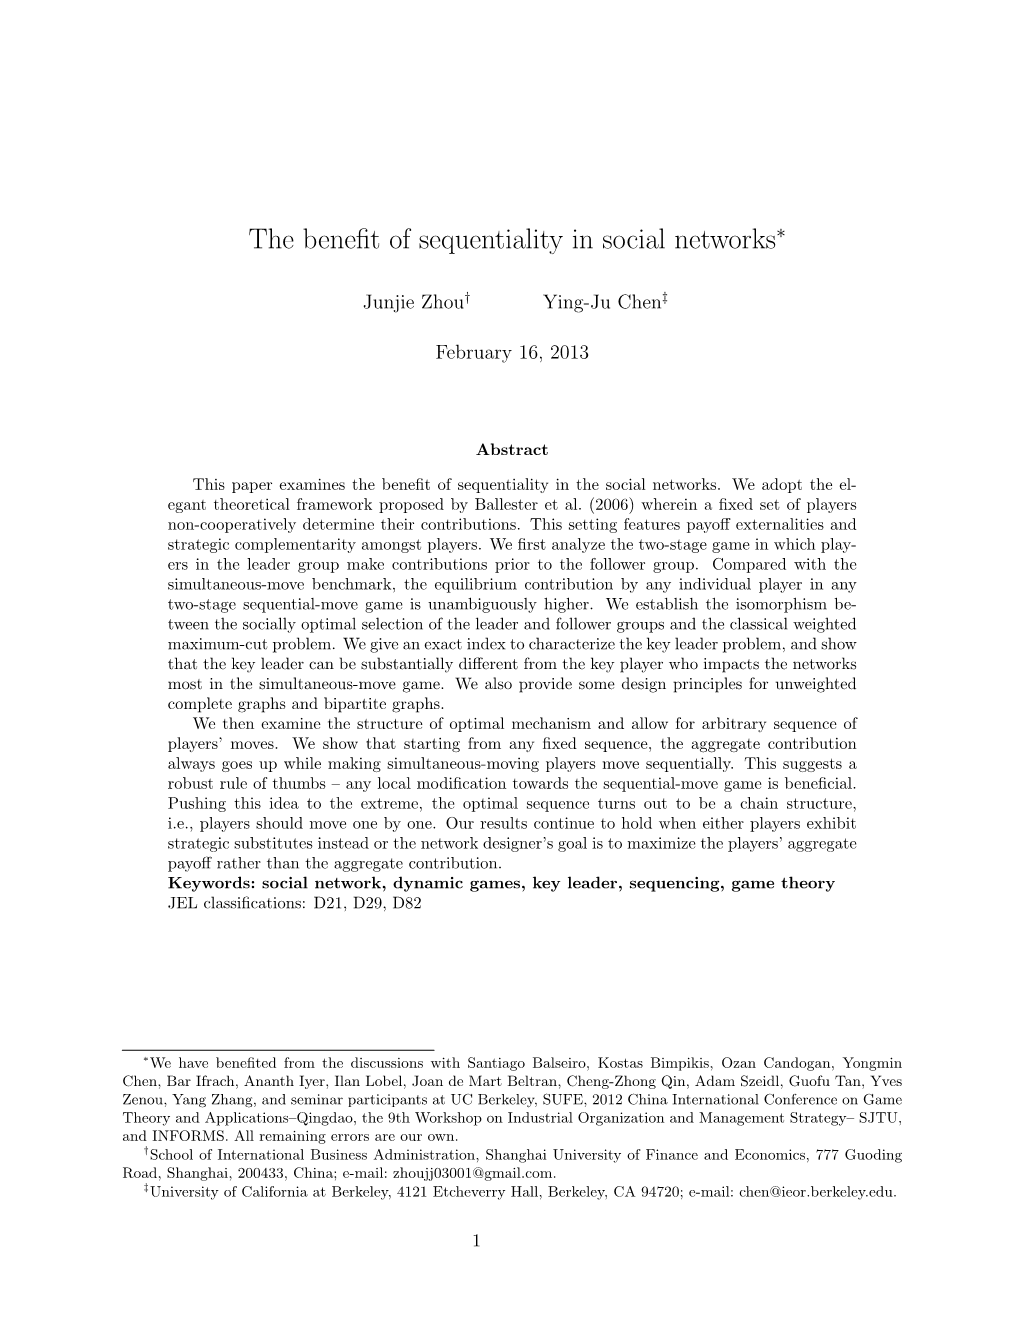 The Benefit of Sequentiality in Social Networks